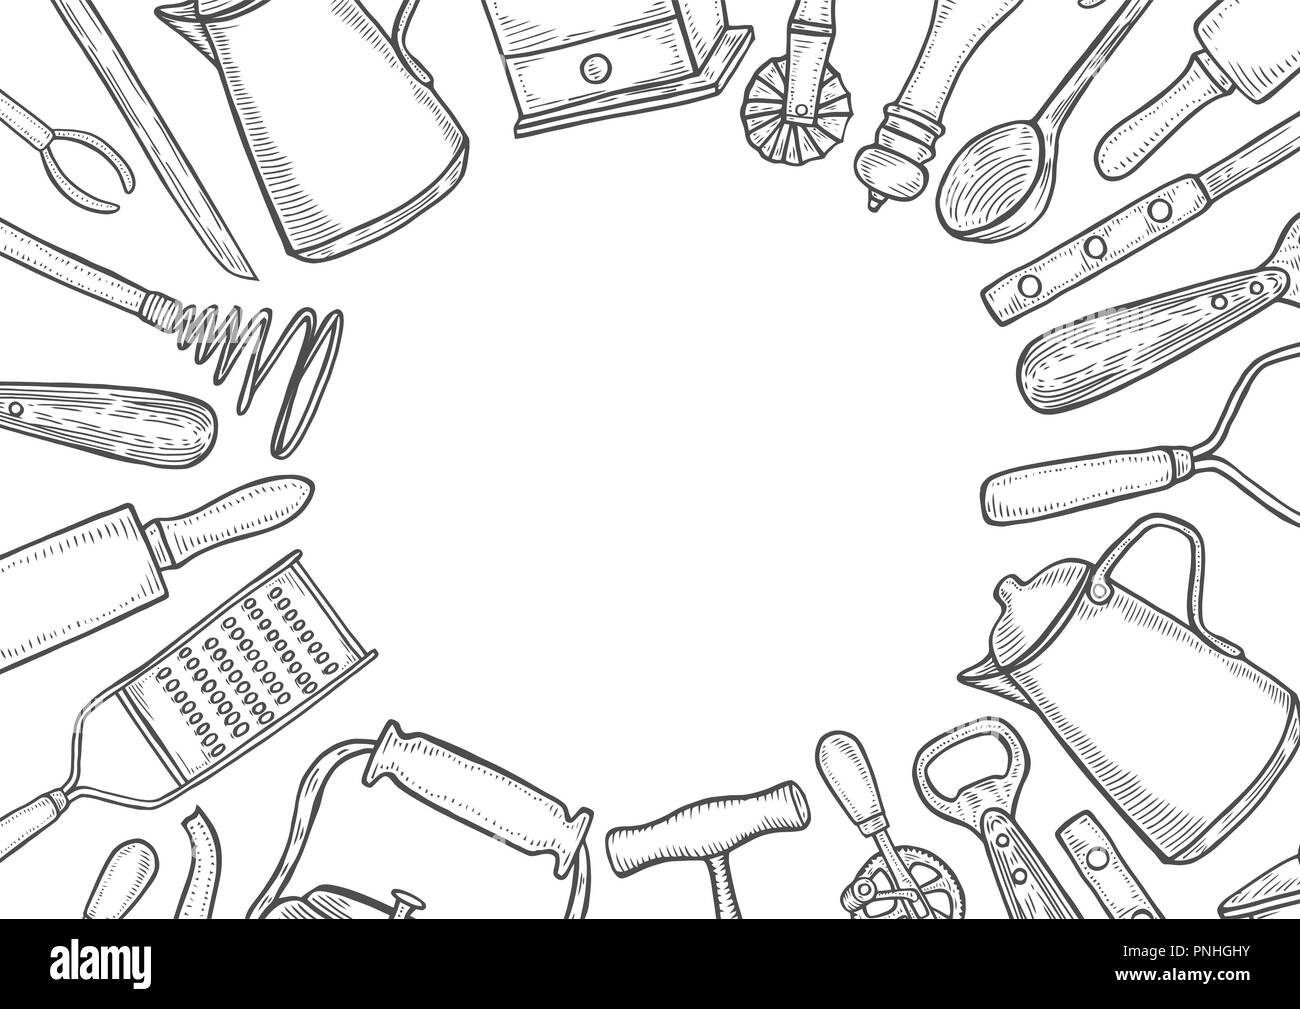 https://c8.alamy.com/comp/PNHGHY/background-of-kitchen-utensils-set-vector-large-collection-hand-drawn-illustration-with-kitchen-tools-utensil-and-cooking-kitchenware-sketch-retro-PNHGHY.jpg